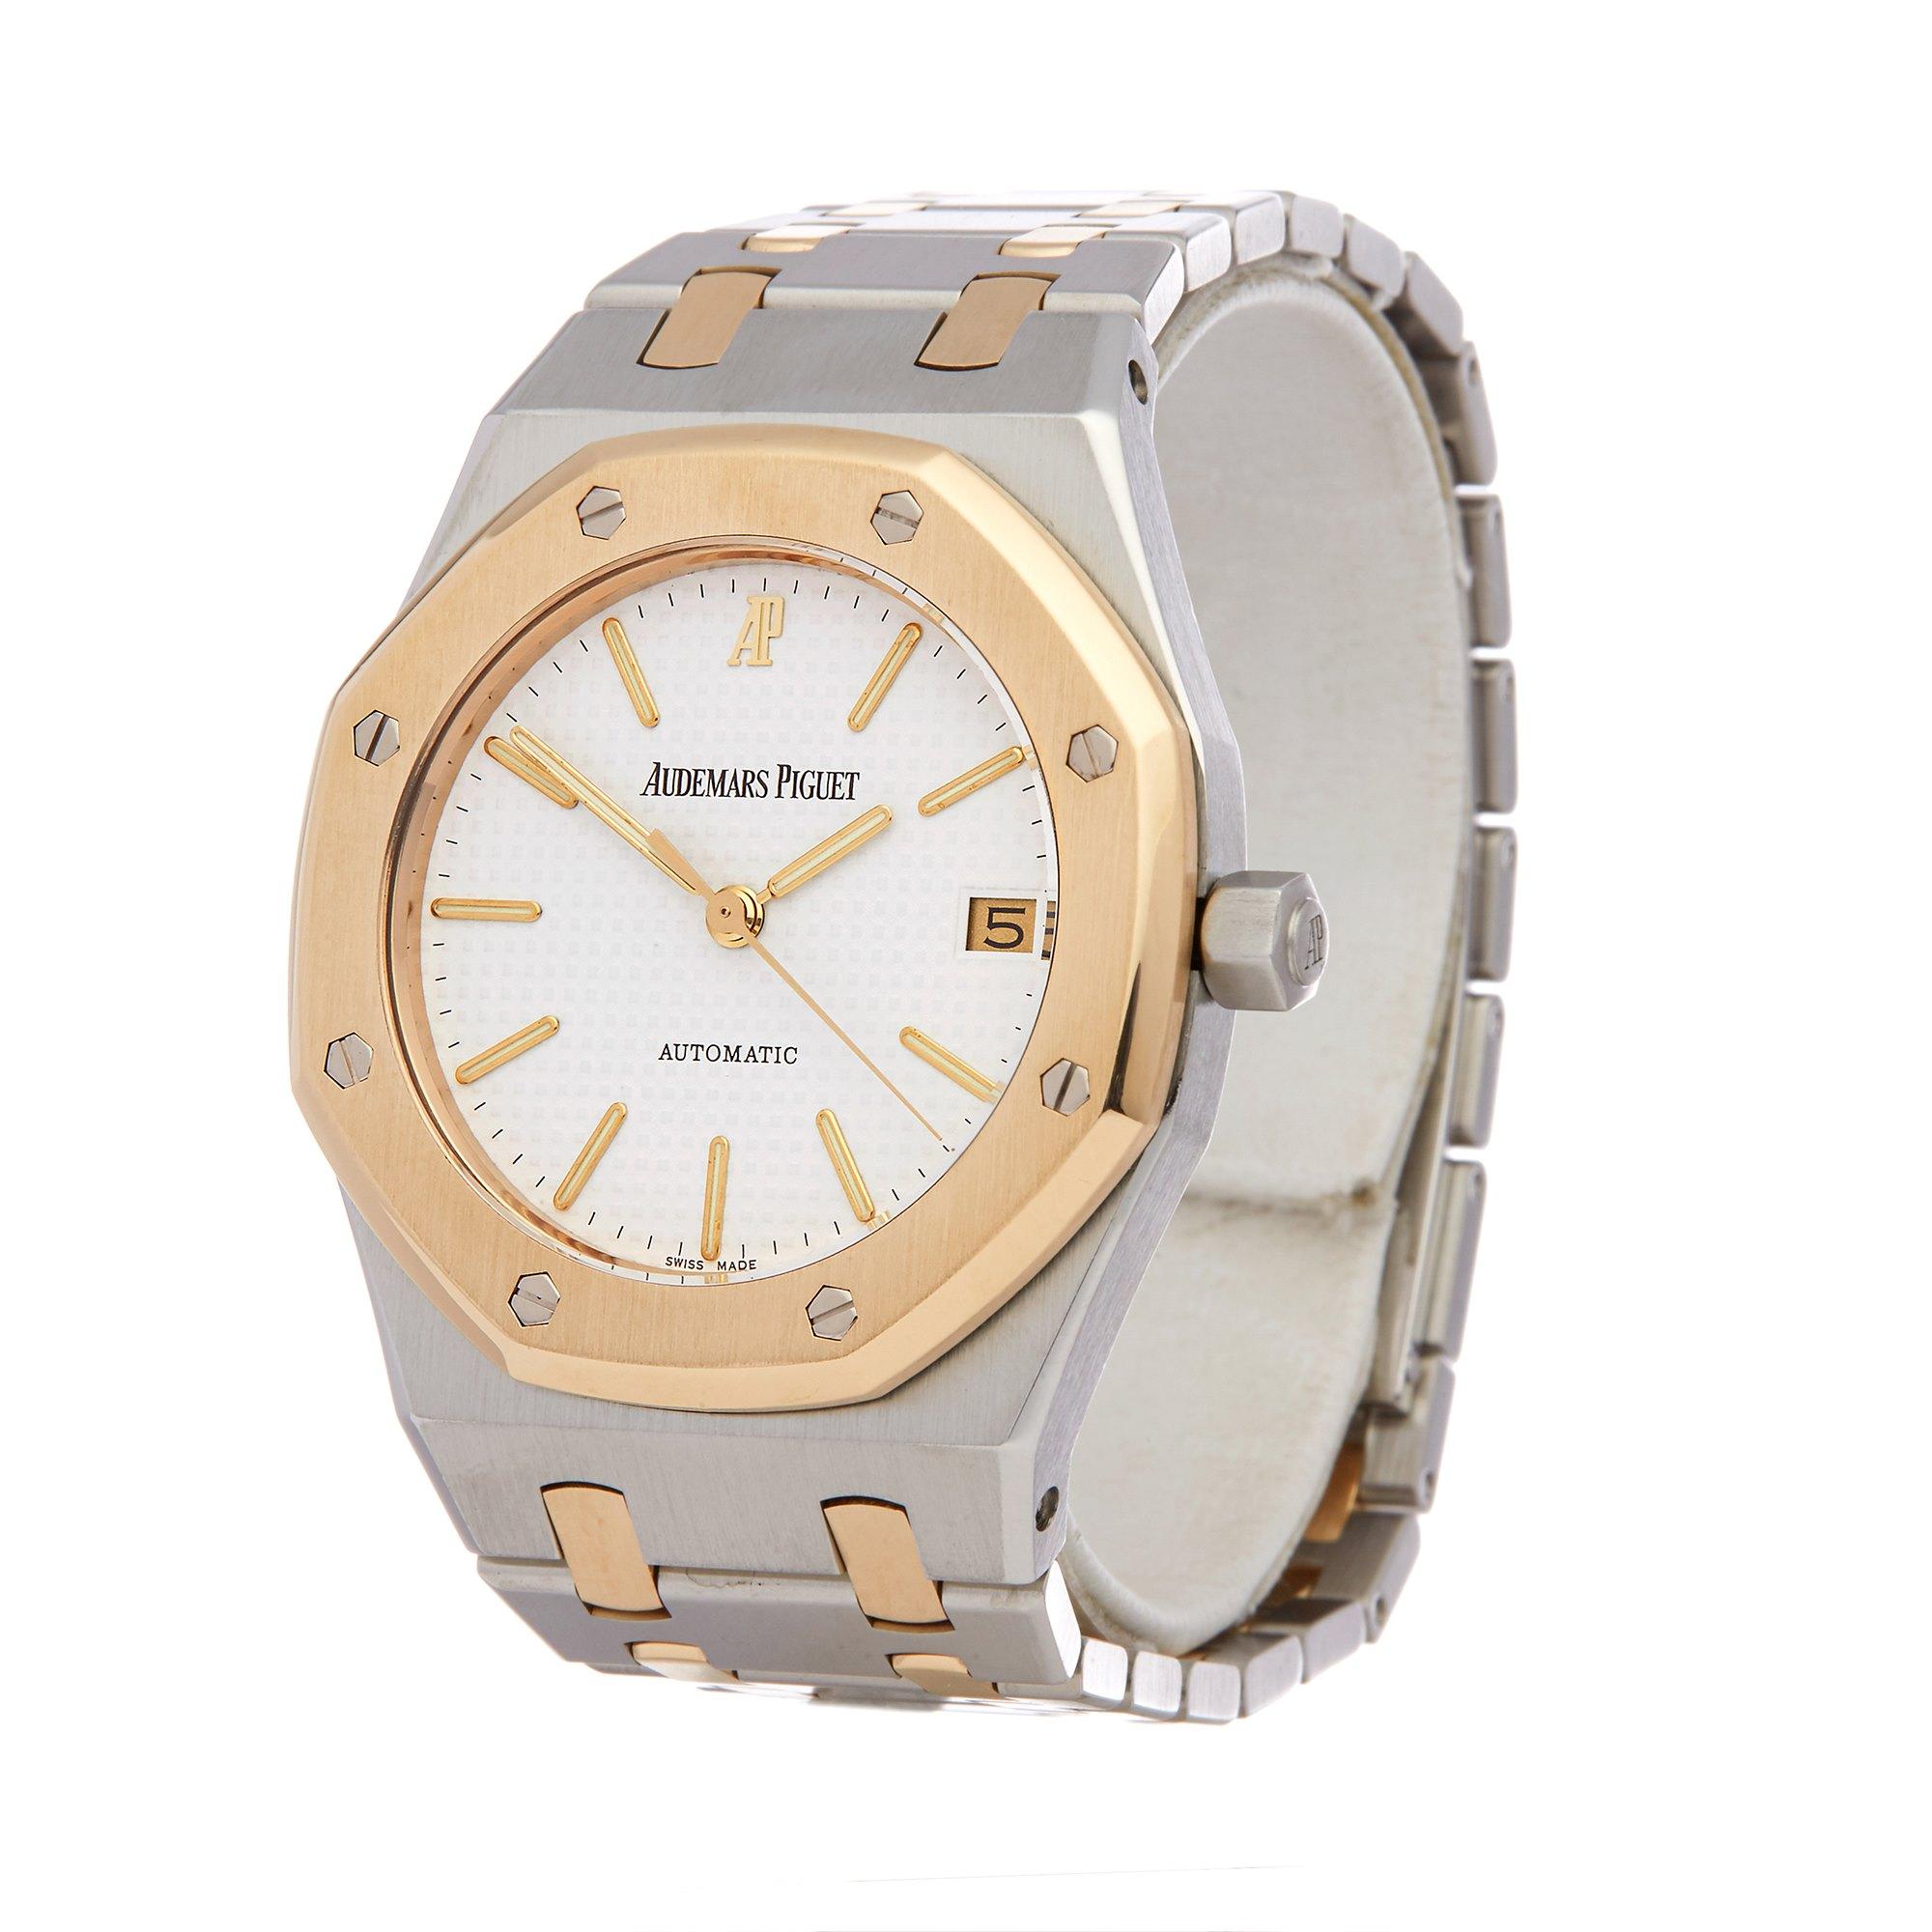 Xupes Reference: W007467
Manufacturer: Audemars Piguet
Model: Royal Oak
Model Variant: 
Model Number: 14790SA.OO.0789SA.01
Age: 1995
Gender: Unisex
Complete With: Audemars Piguet Service Box
Dial: White Baton
Glass: Sapphire Crystal
Case Size: